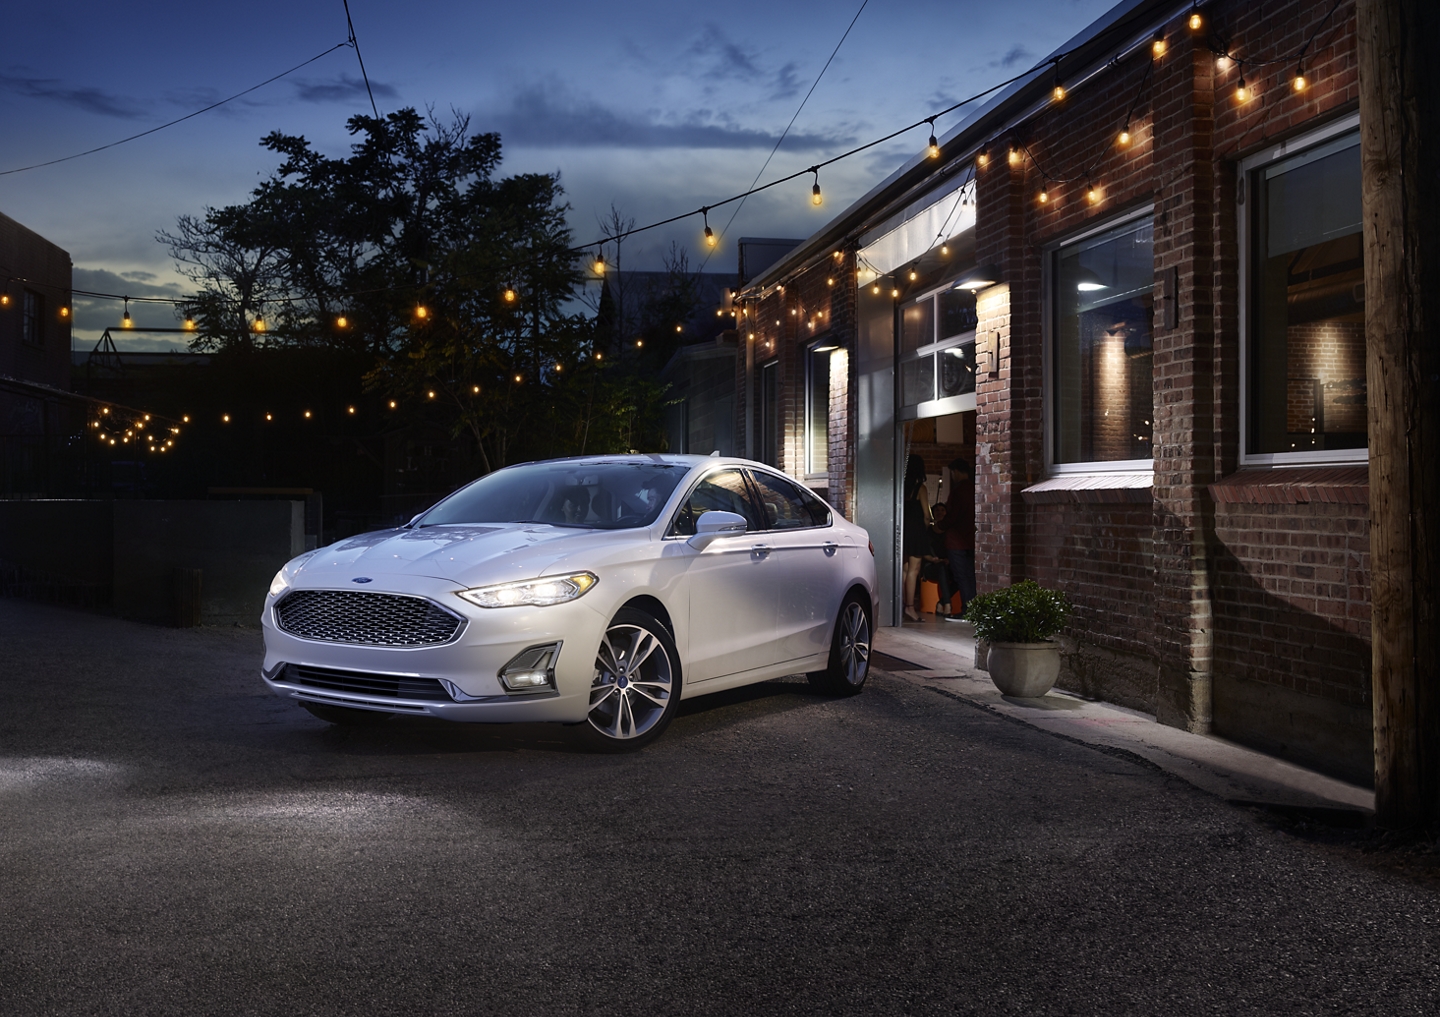 https://ford-h.assetsadobe.com/is/image/content/dam/vdm_ford/live/en_us/ford/nameplate/fusion/2020/collections/dm/19_FRD_FSN_43010_PK.tif?croppathe=1_3x2&wid=1440